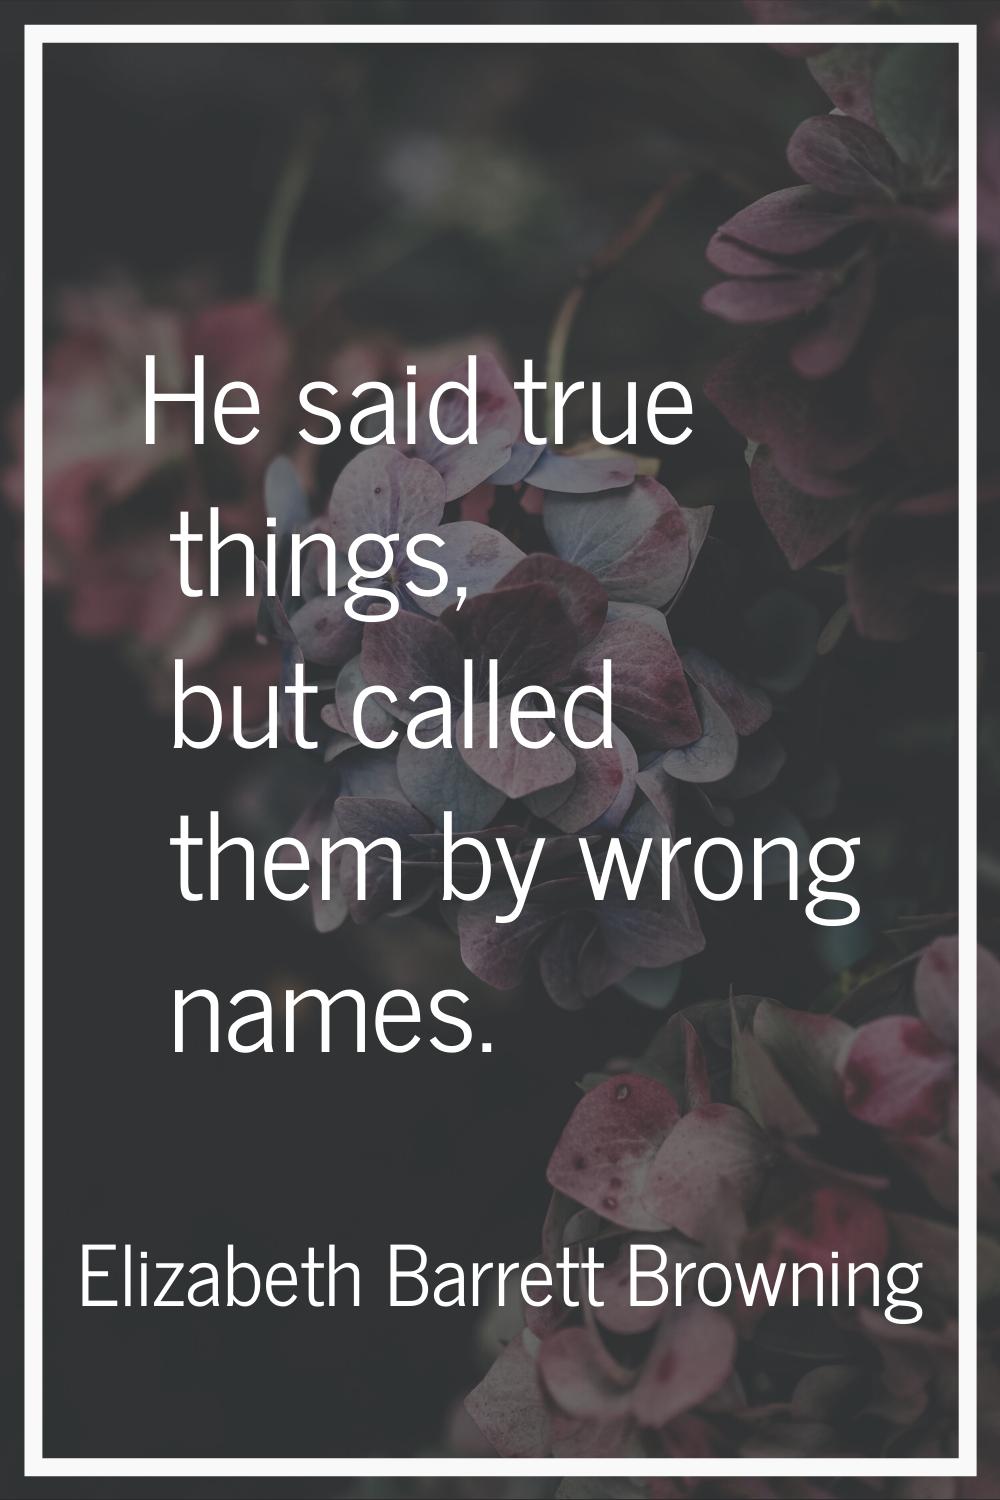 He said true things, but called them by wrong names.